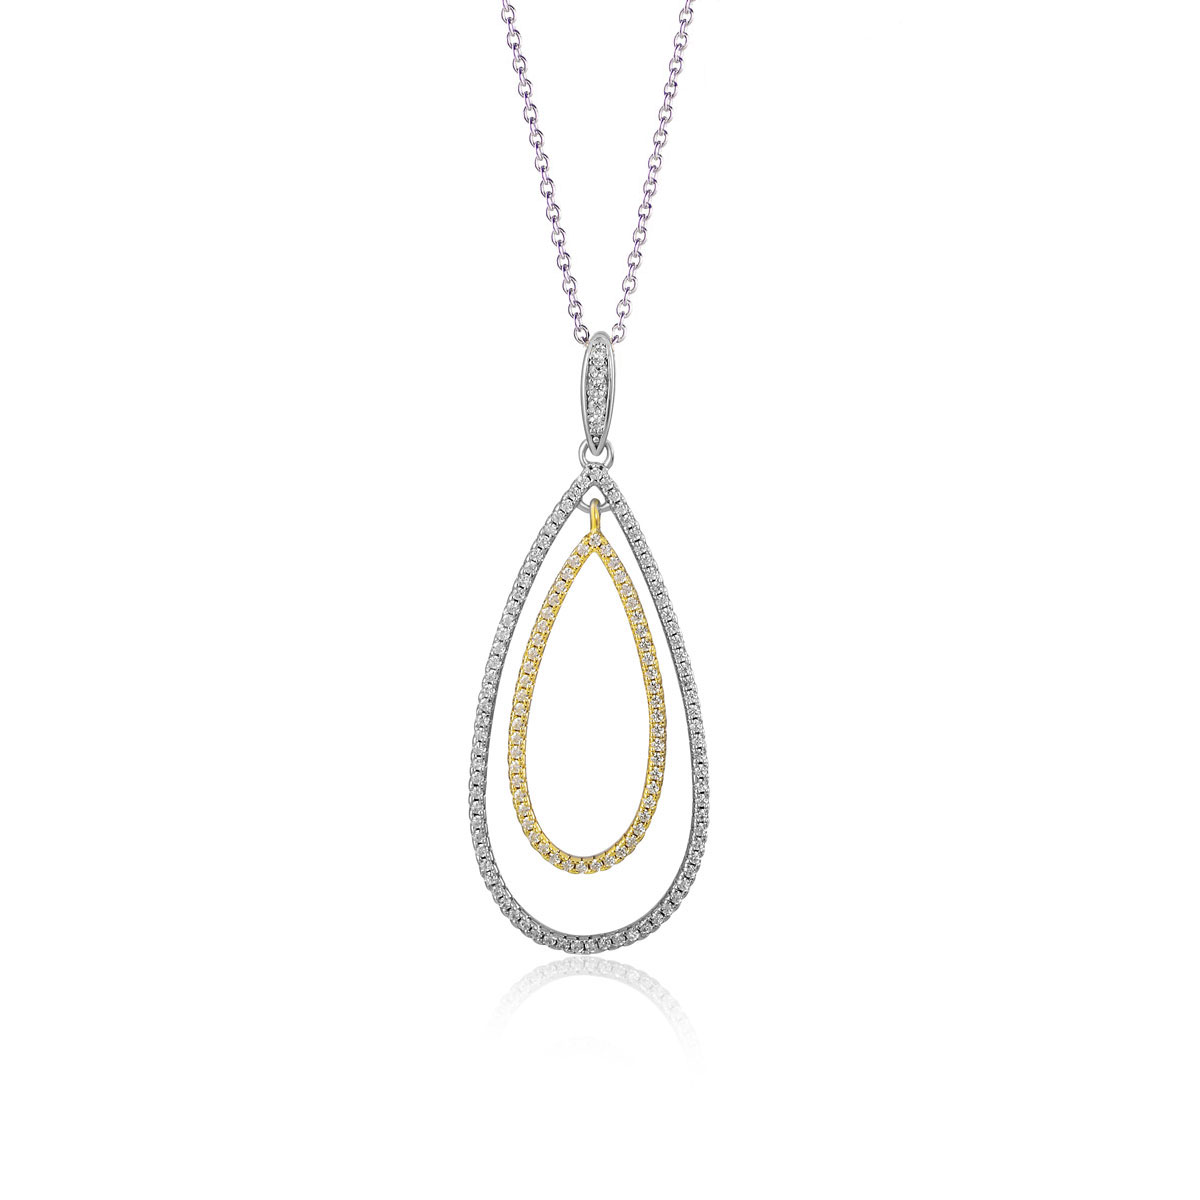 Cashs Ireland, Teardrop Sterling Silver and Gold Pave Necklace